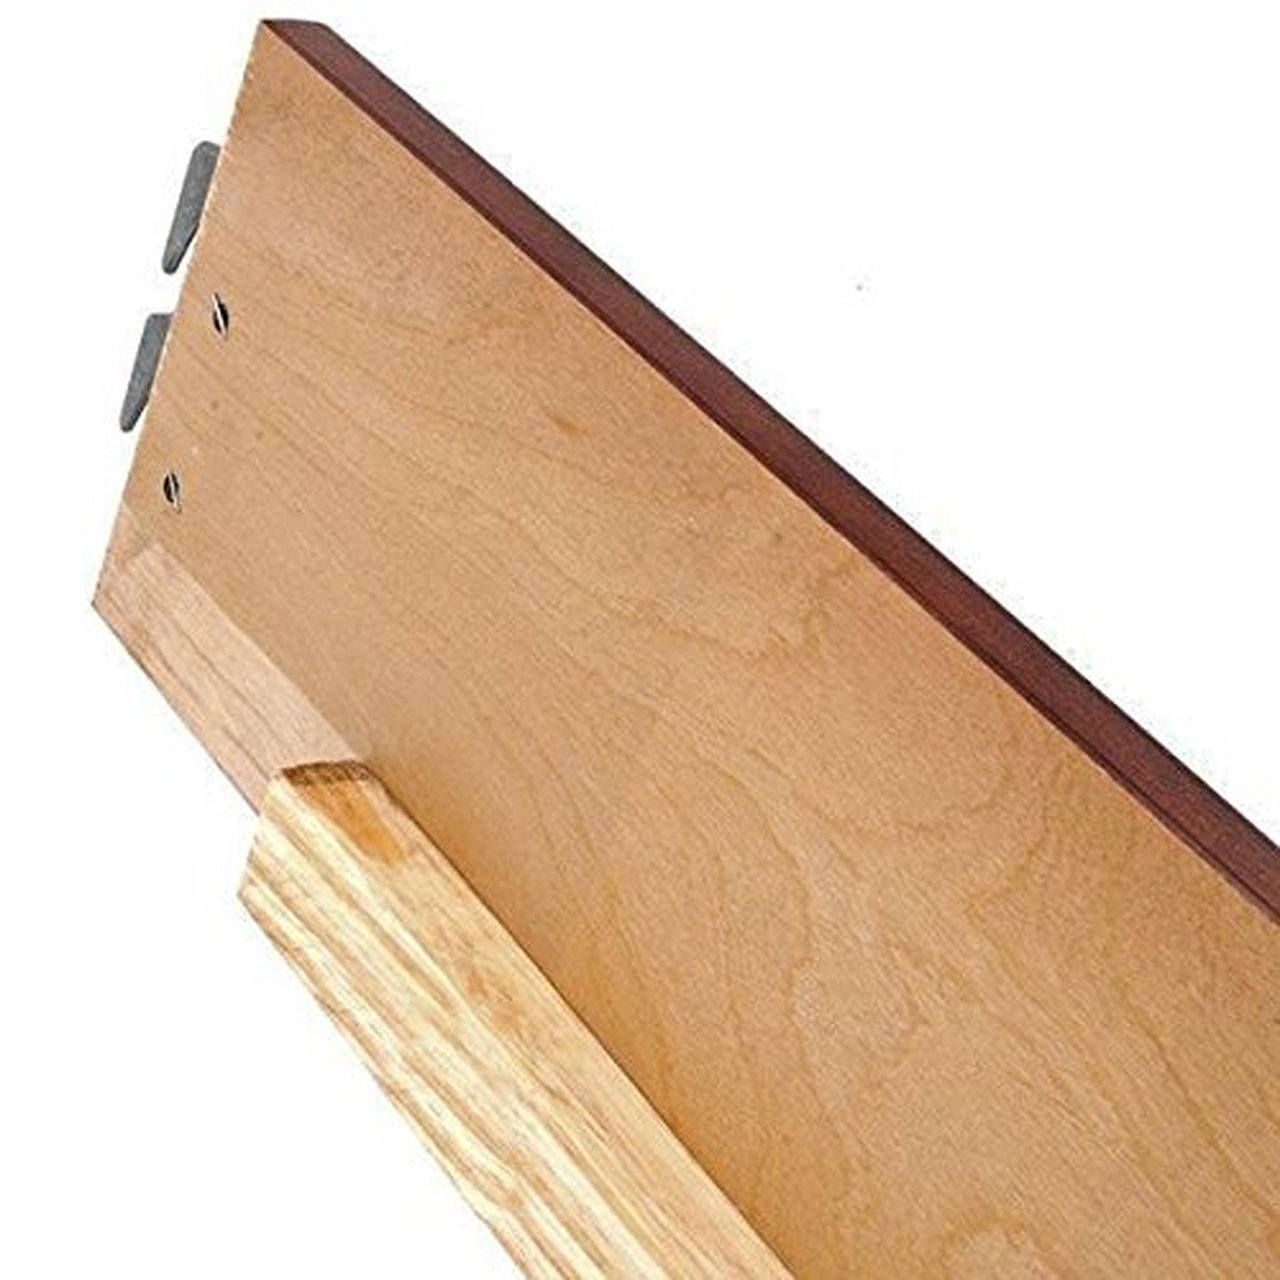 Bed Claw Replacement 82" Hook-on Wood Bed Rails, Frame for Queen/King beds, Assorted Colors, Set of 2